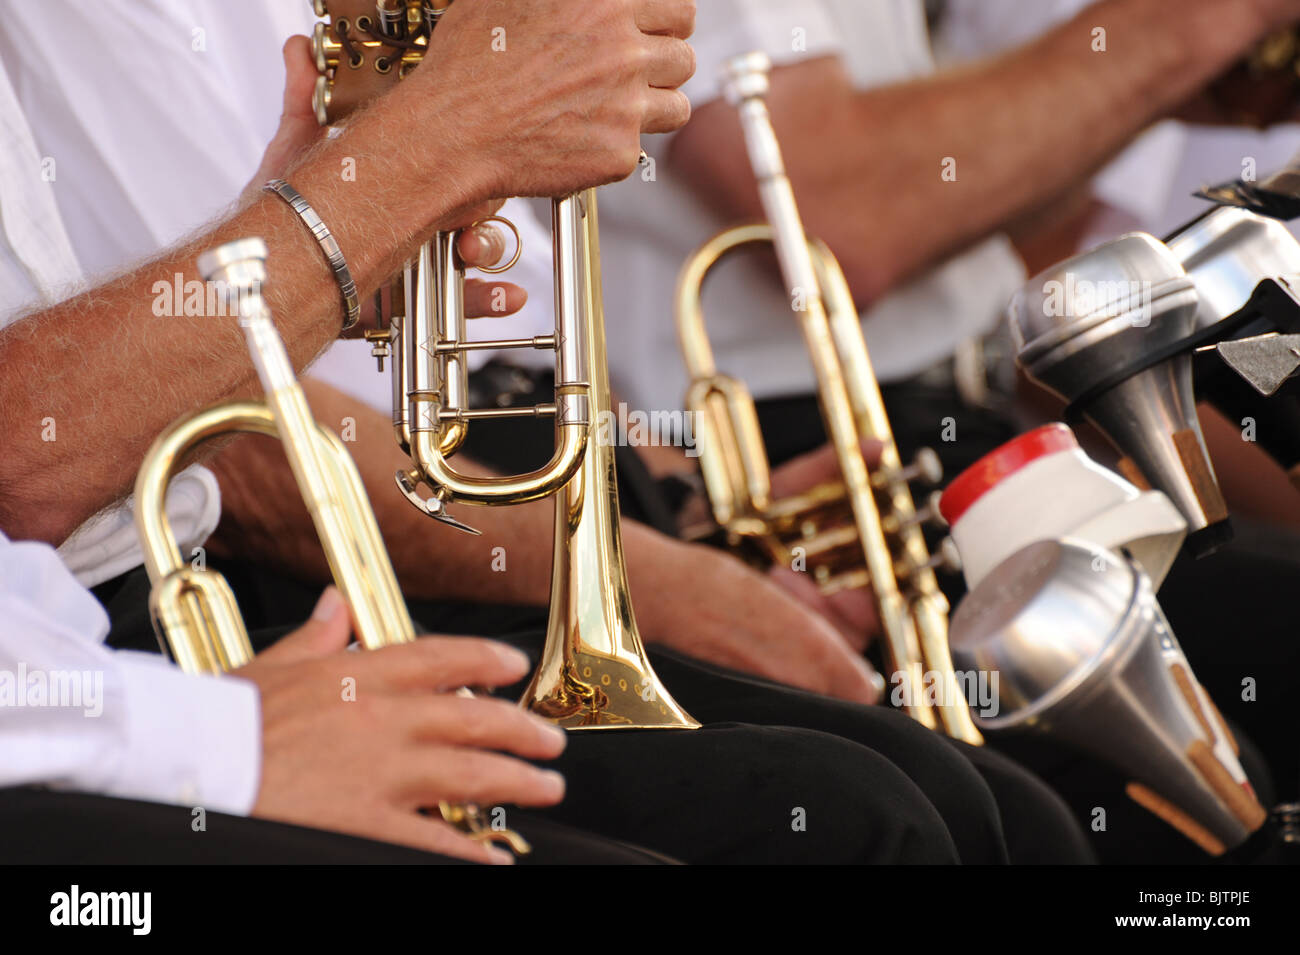 Photograph of trumpets being held by people shot does not include their heads Stock Photo